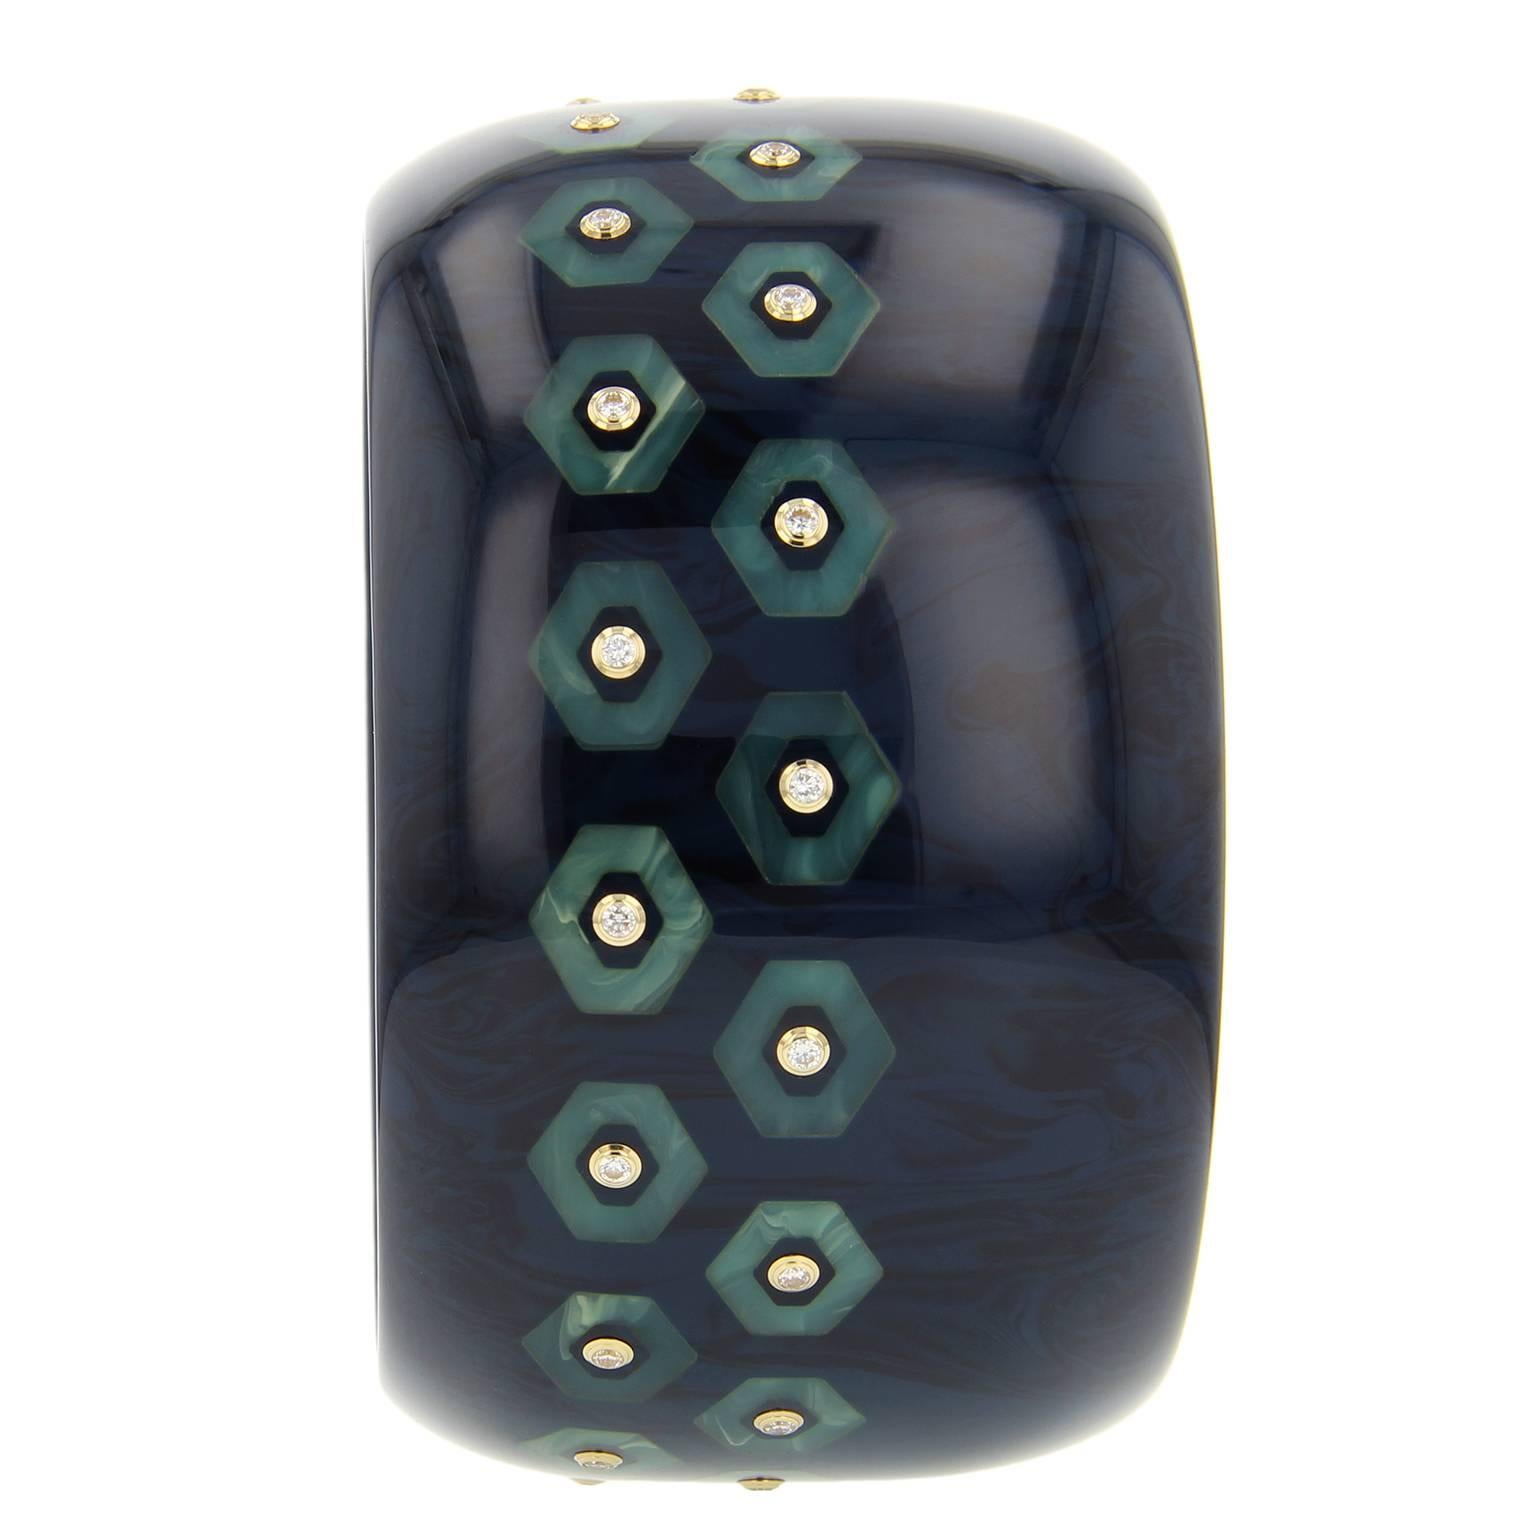 This bold and elegant bangle was handcrafted of subtly marbled blue and black vintage bakelite. Part of the Mark Davis Collector line, it was precisely inlaid with pieces of light blue bakelite.  Each hexagon is centered with a fine diamond